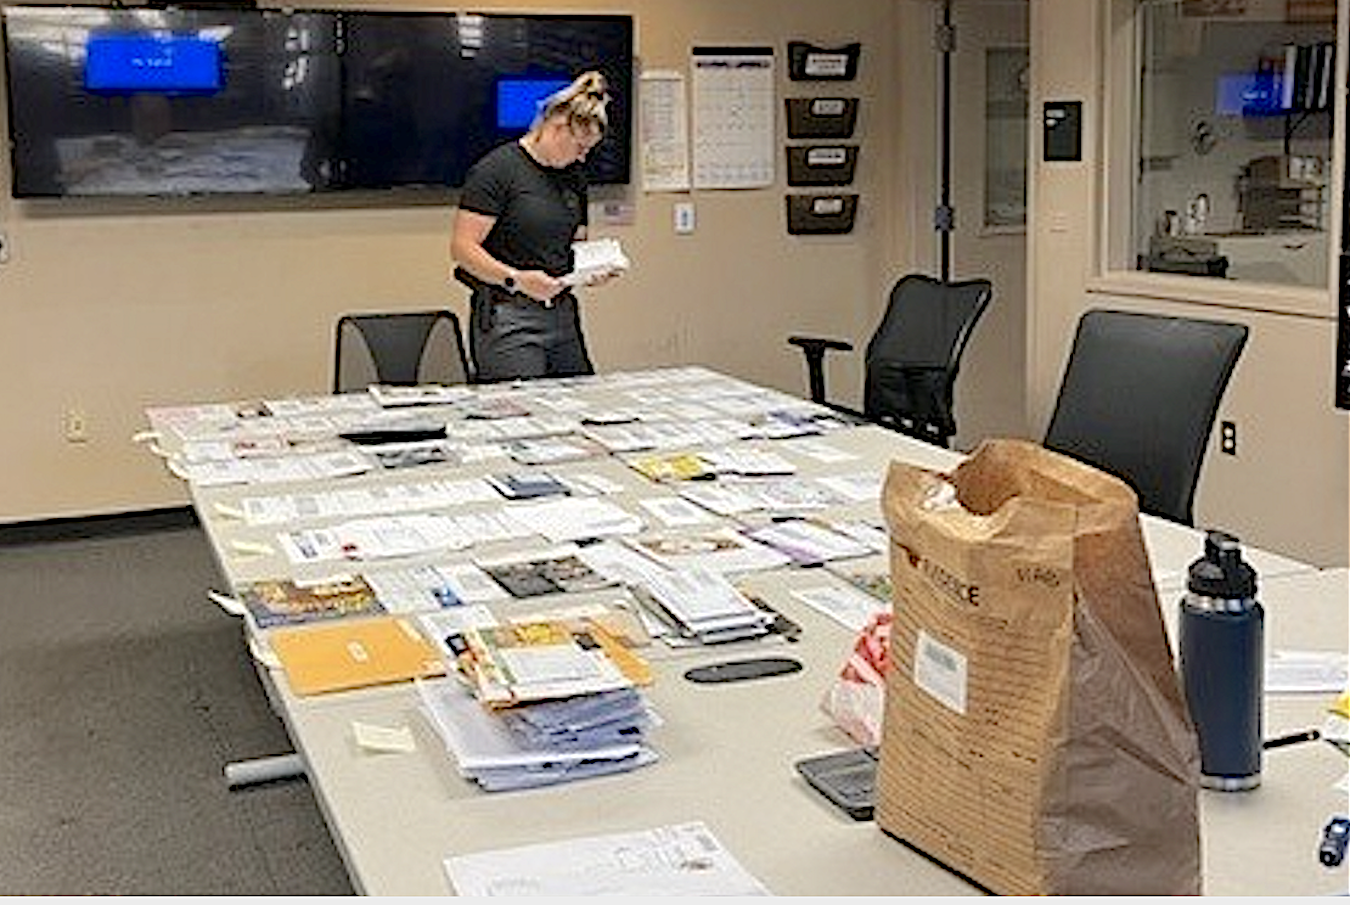 Fong Street traffic stop nabs 2 felons, recovers mail stolen from Folsom residents